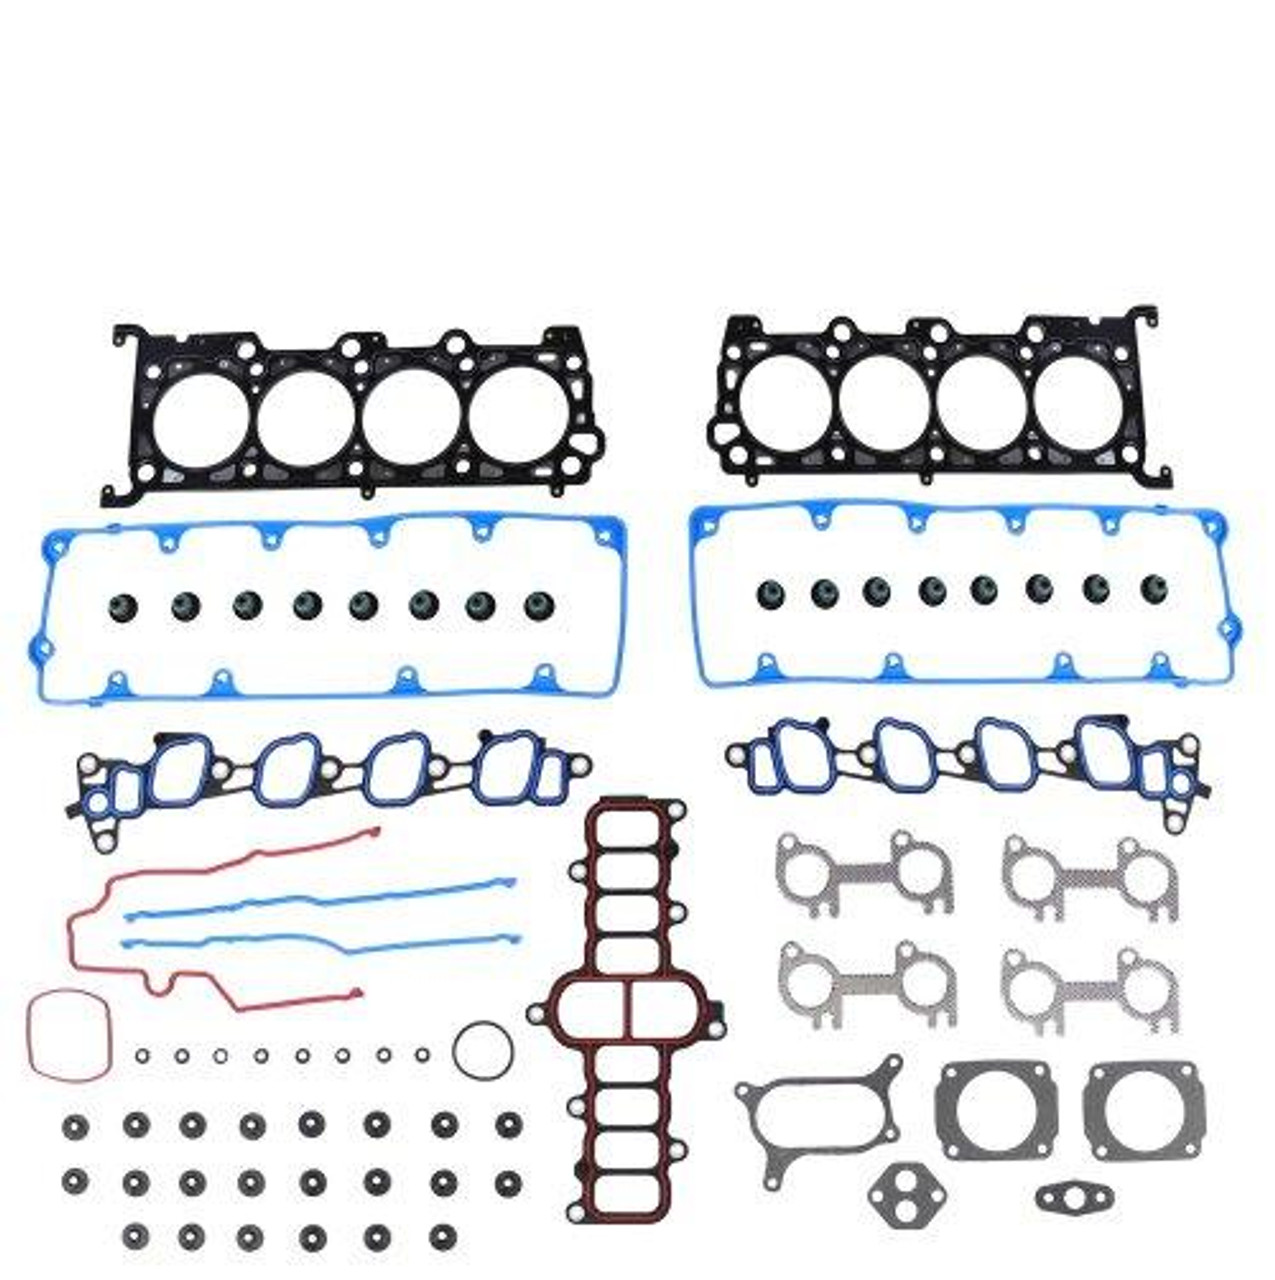 Head Gasket Set - 2003 Ford Expedition 4.6L Engine Parts # HGS4177ZE6